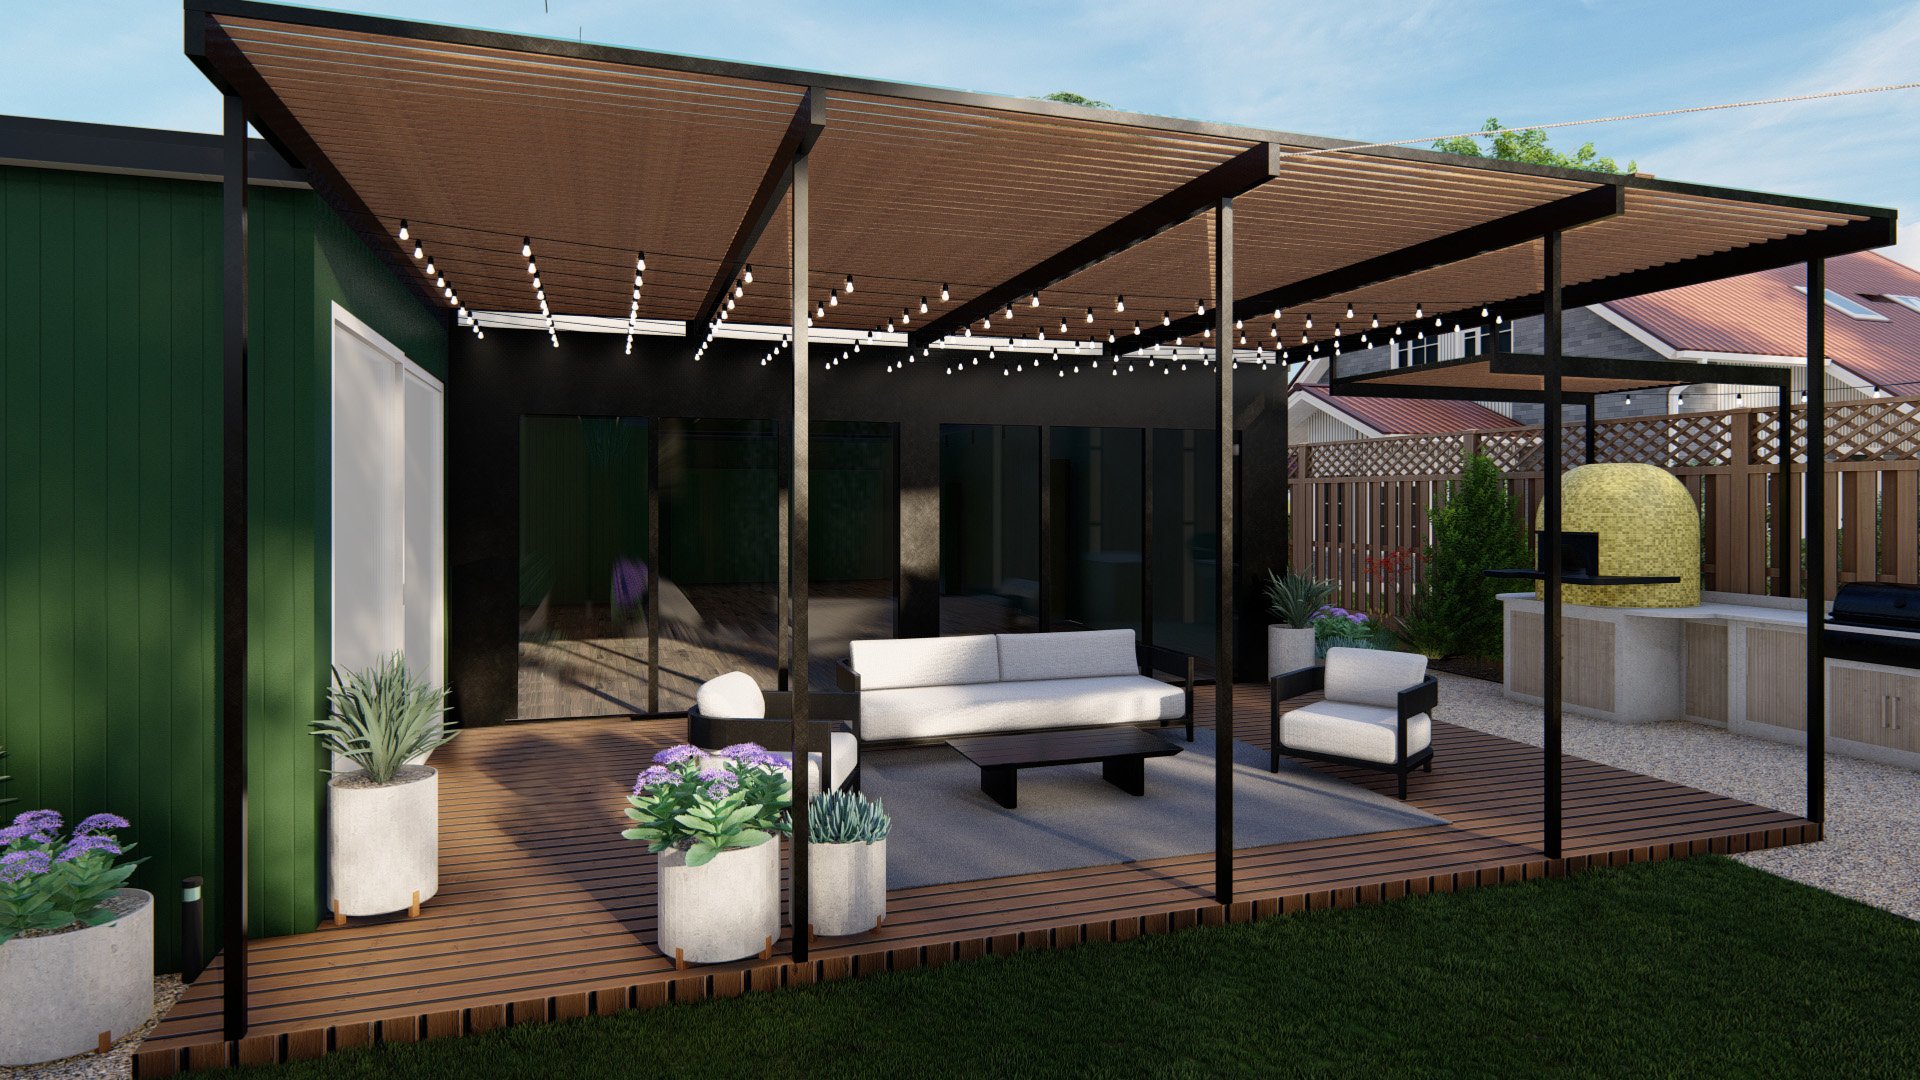 Bright wood backyard deck and matching pergola with black posts and black aluminum outdoor furniture.